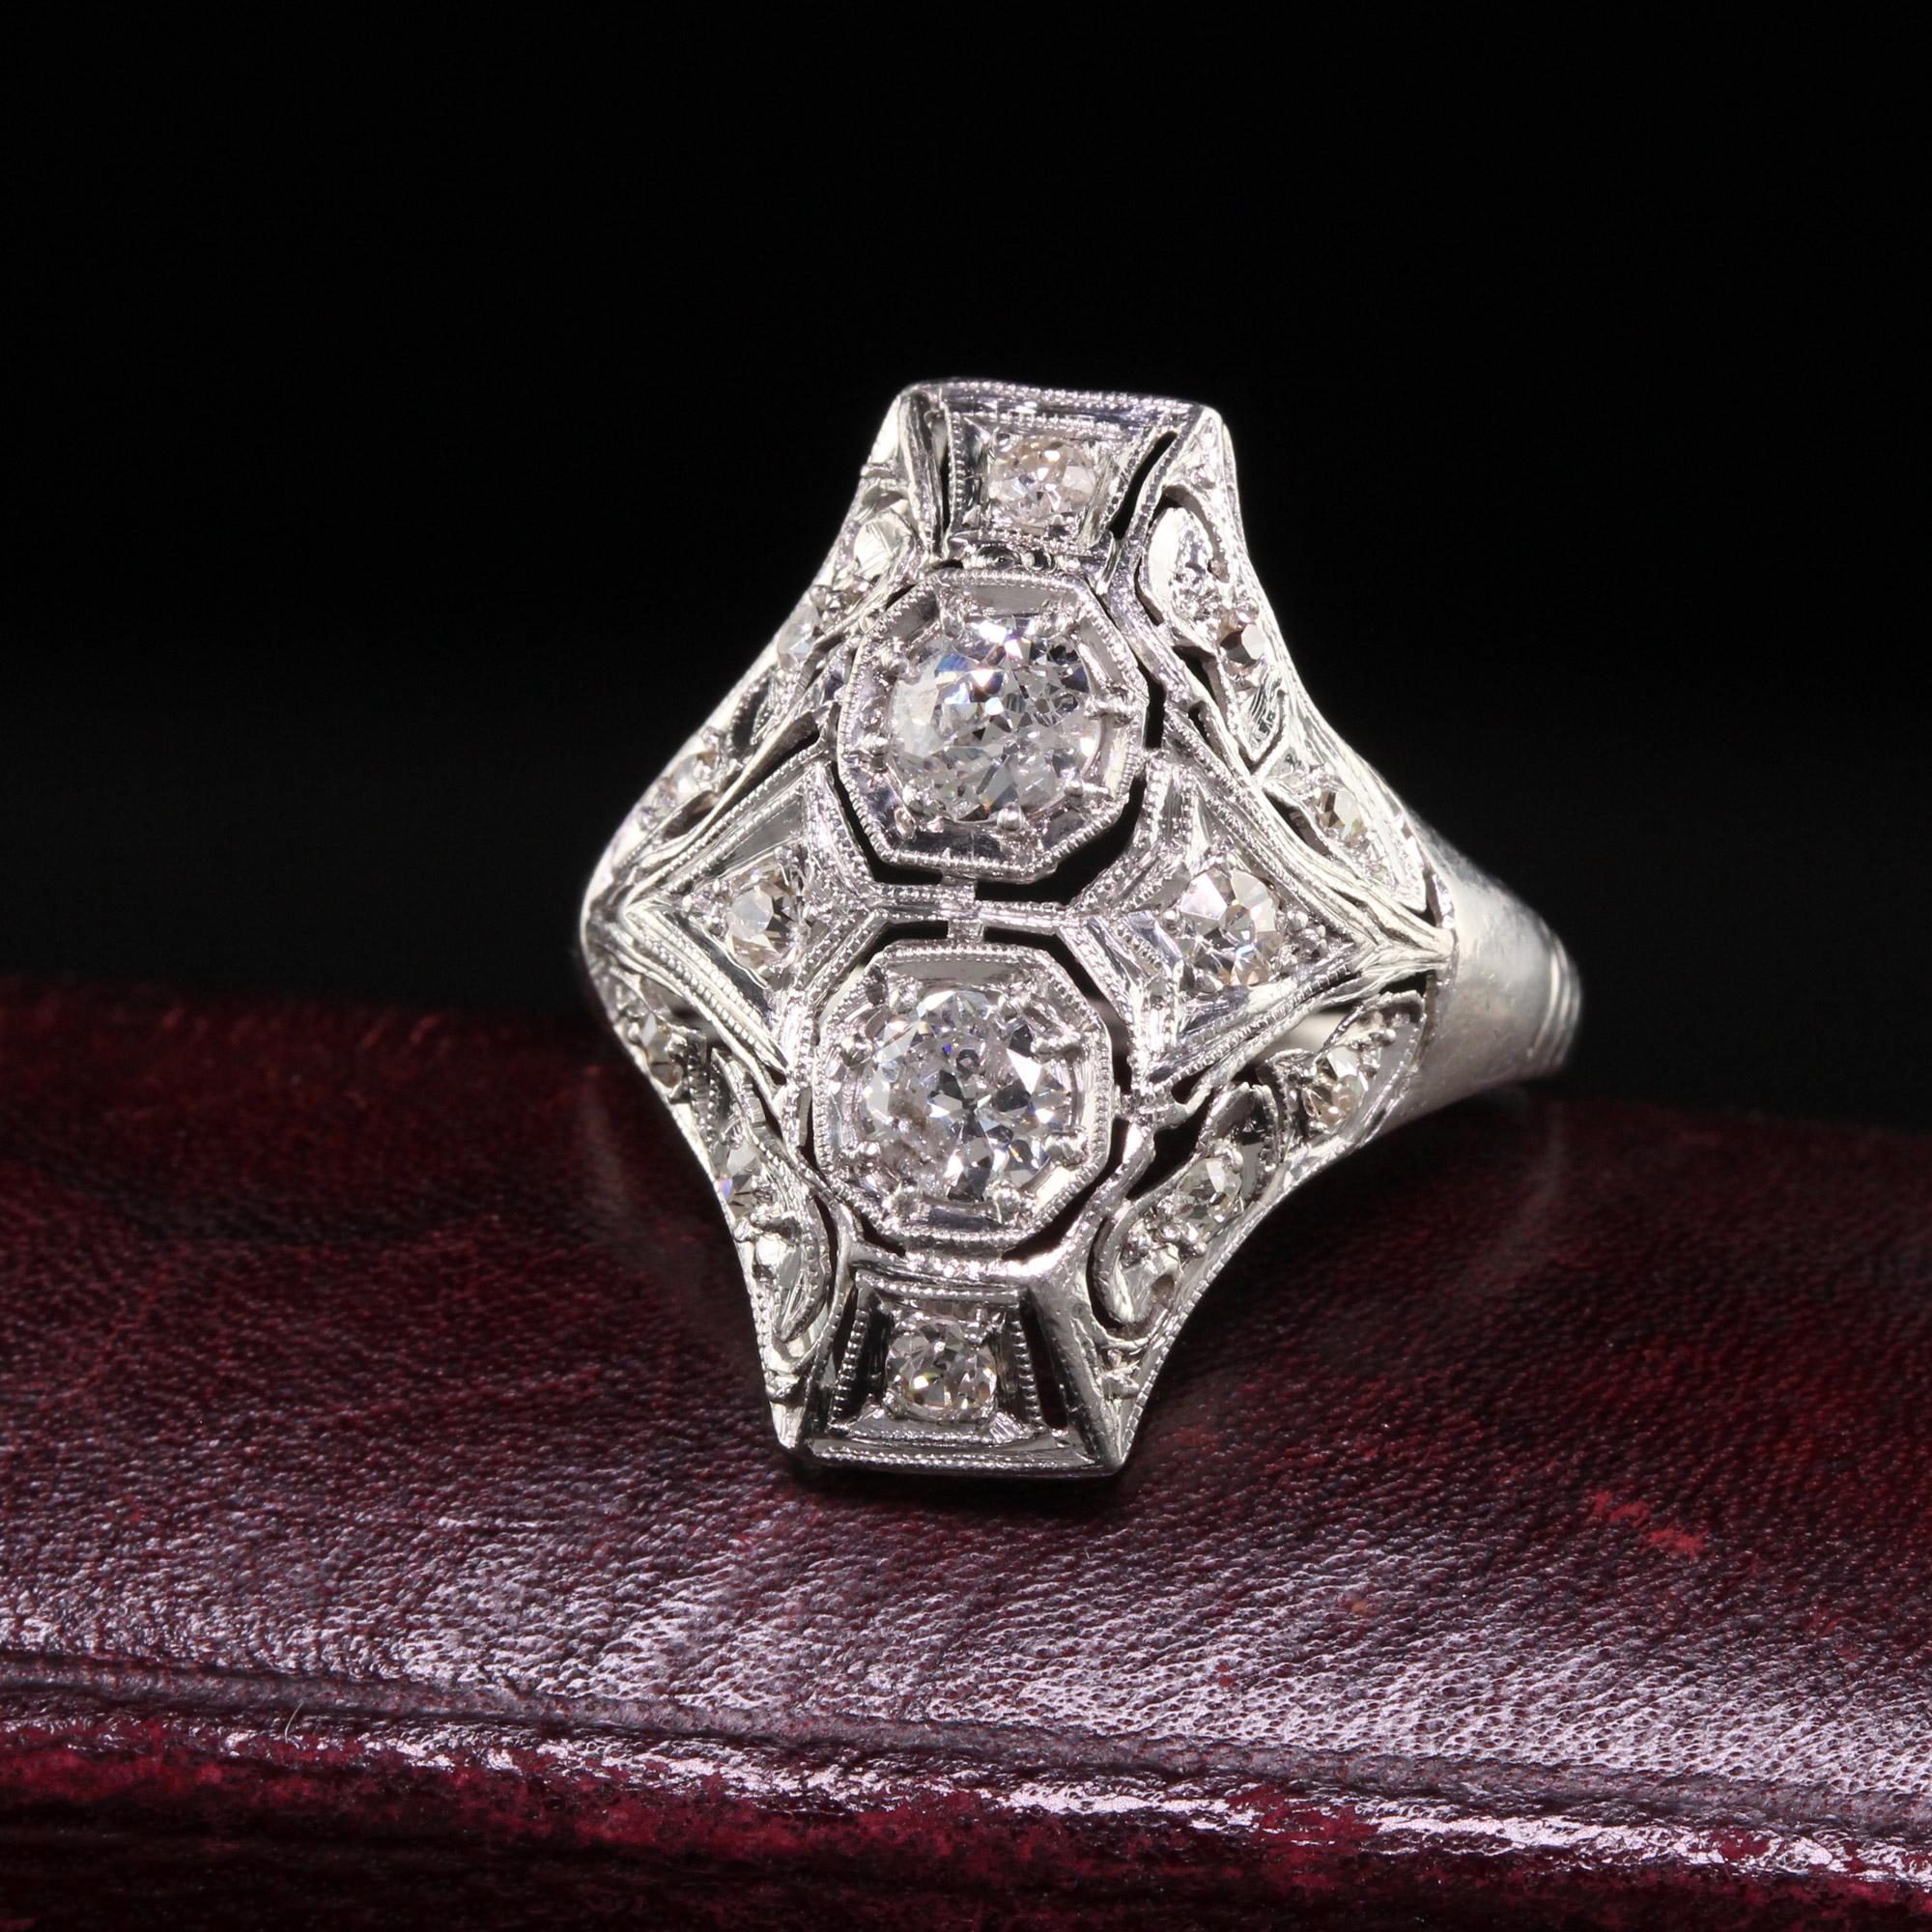 Beautiful Antique Art Deco Platinum Two Stone Filigree Shield Ring. This gorgeous ring is crafted in platinum. It has old european cut diamonds set across the top of an Art Deco filigree mounting.

Item #R1316

Metal: Platinum

Weight: 3.7